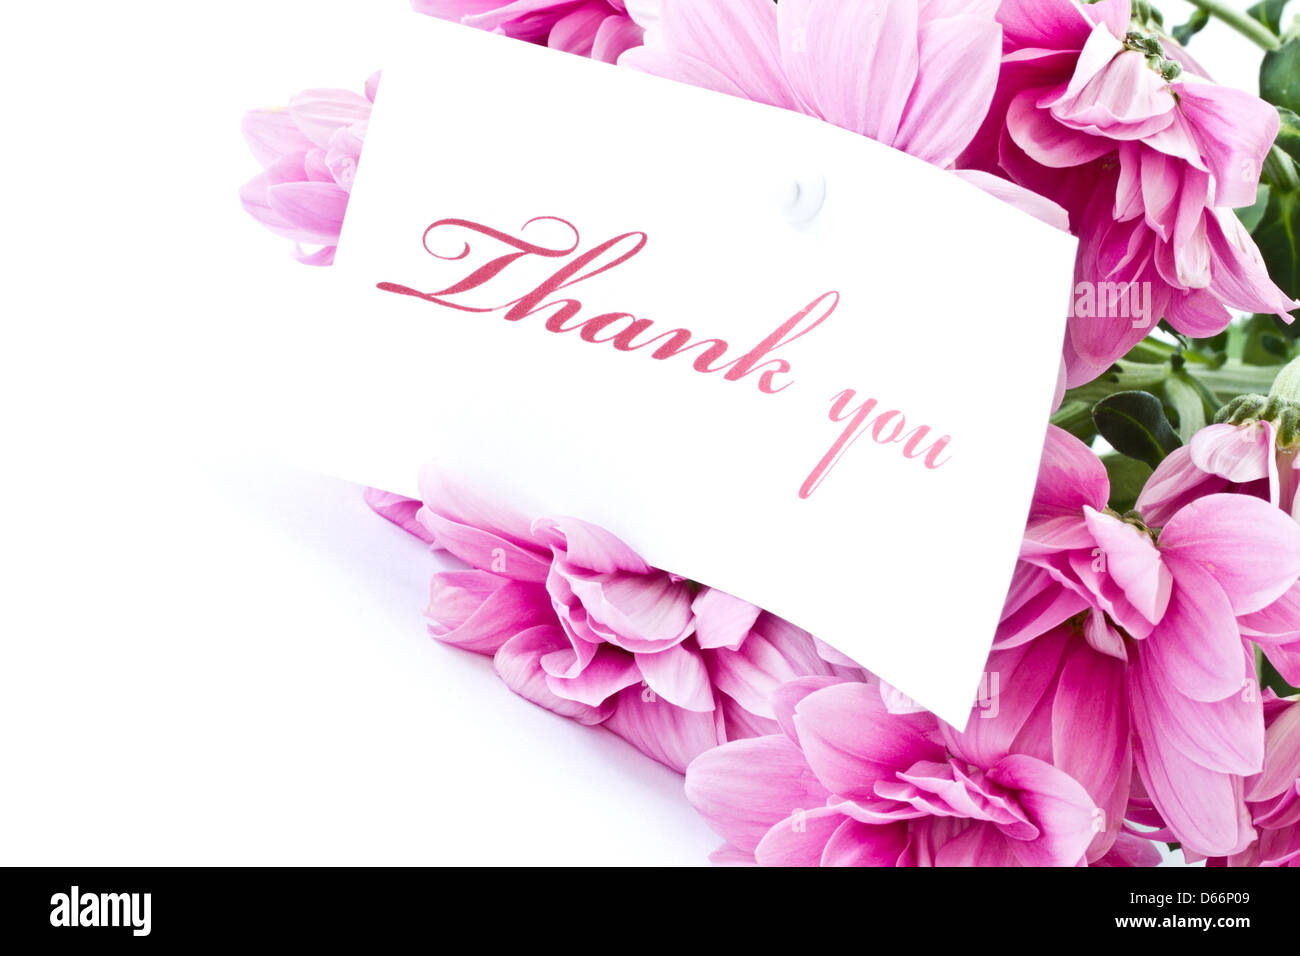 Thank You Cards | Birthday & Greeting Cards by Davia - Free eCards - Page 2  of 5 | Thank you wallpaper, Thank you messages gratitude, Thank you  greetings